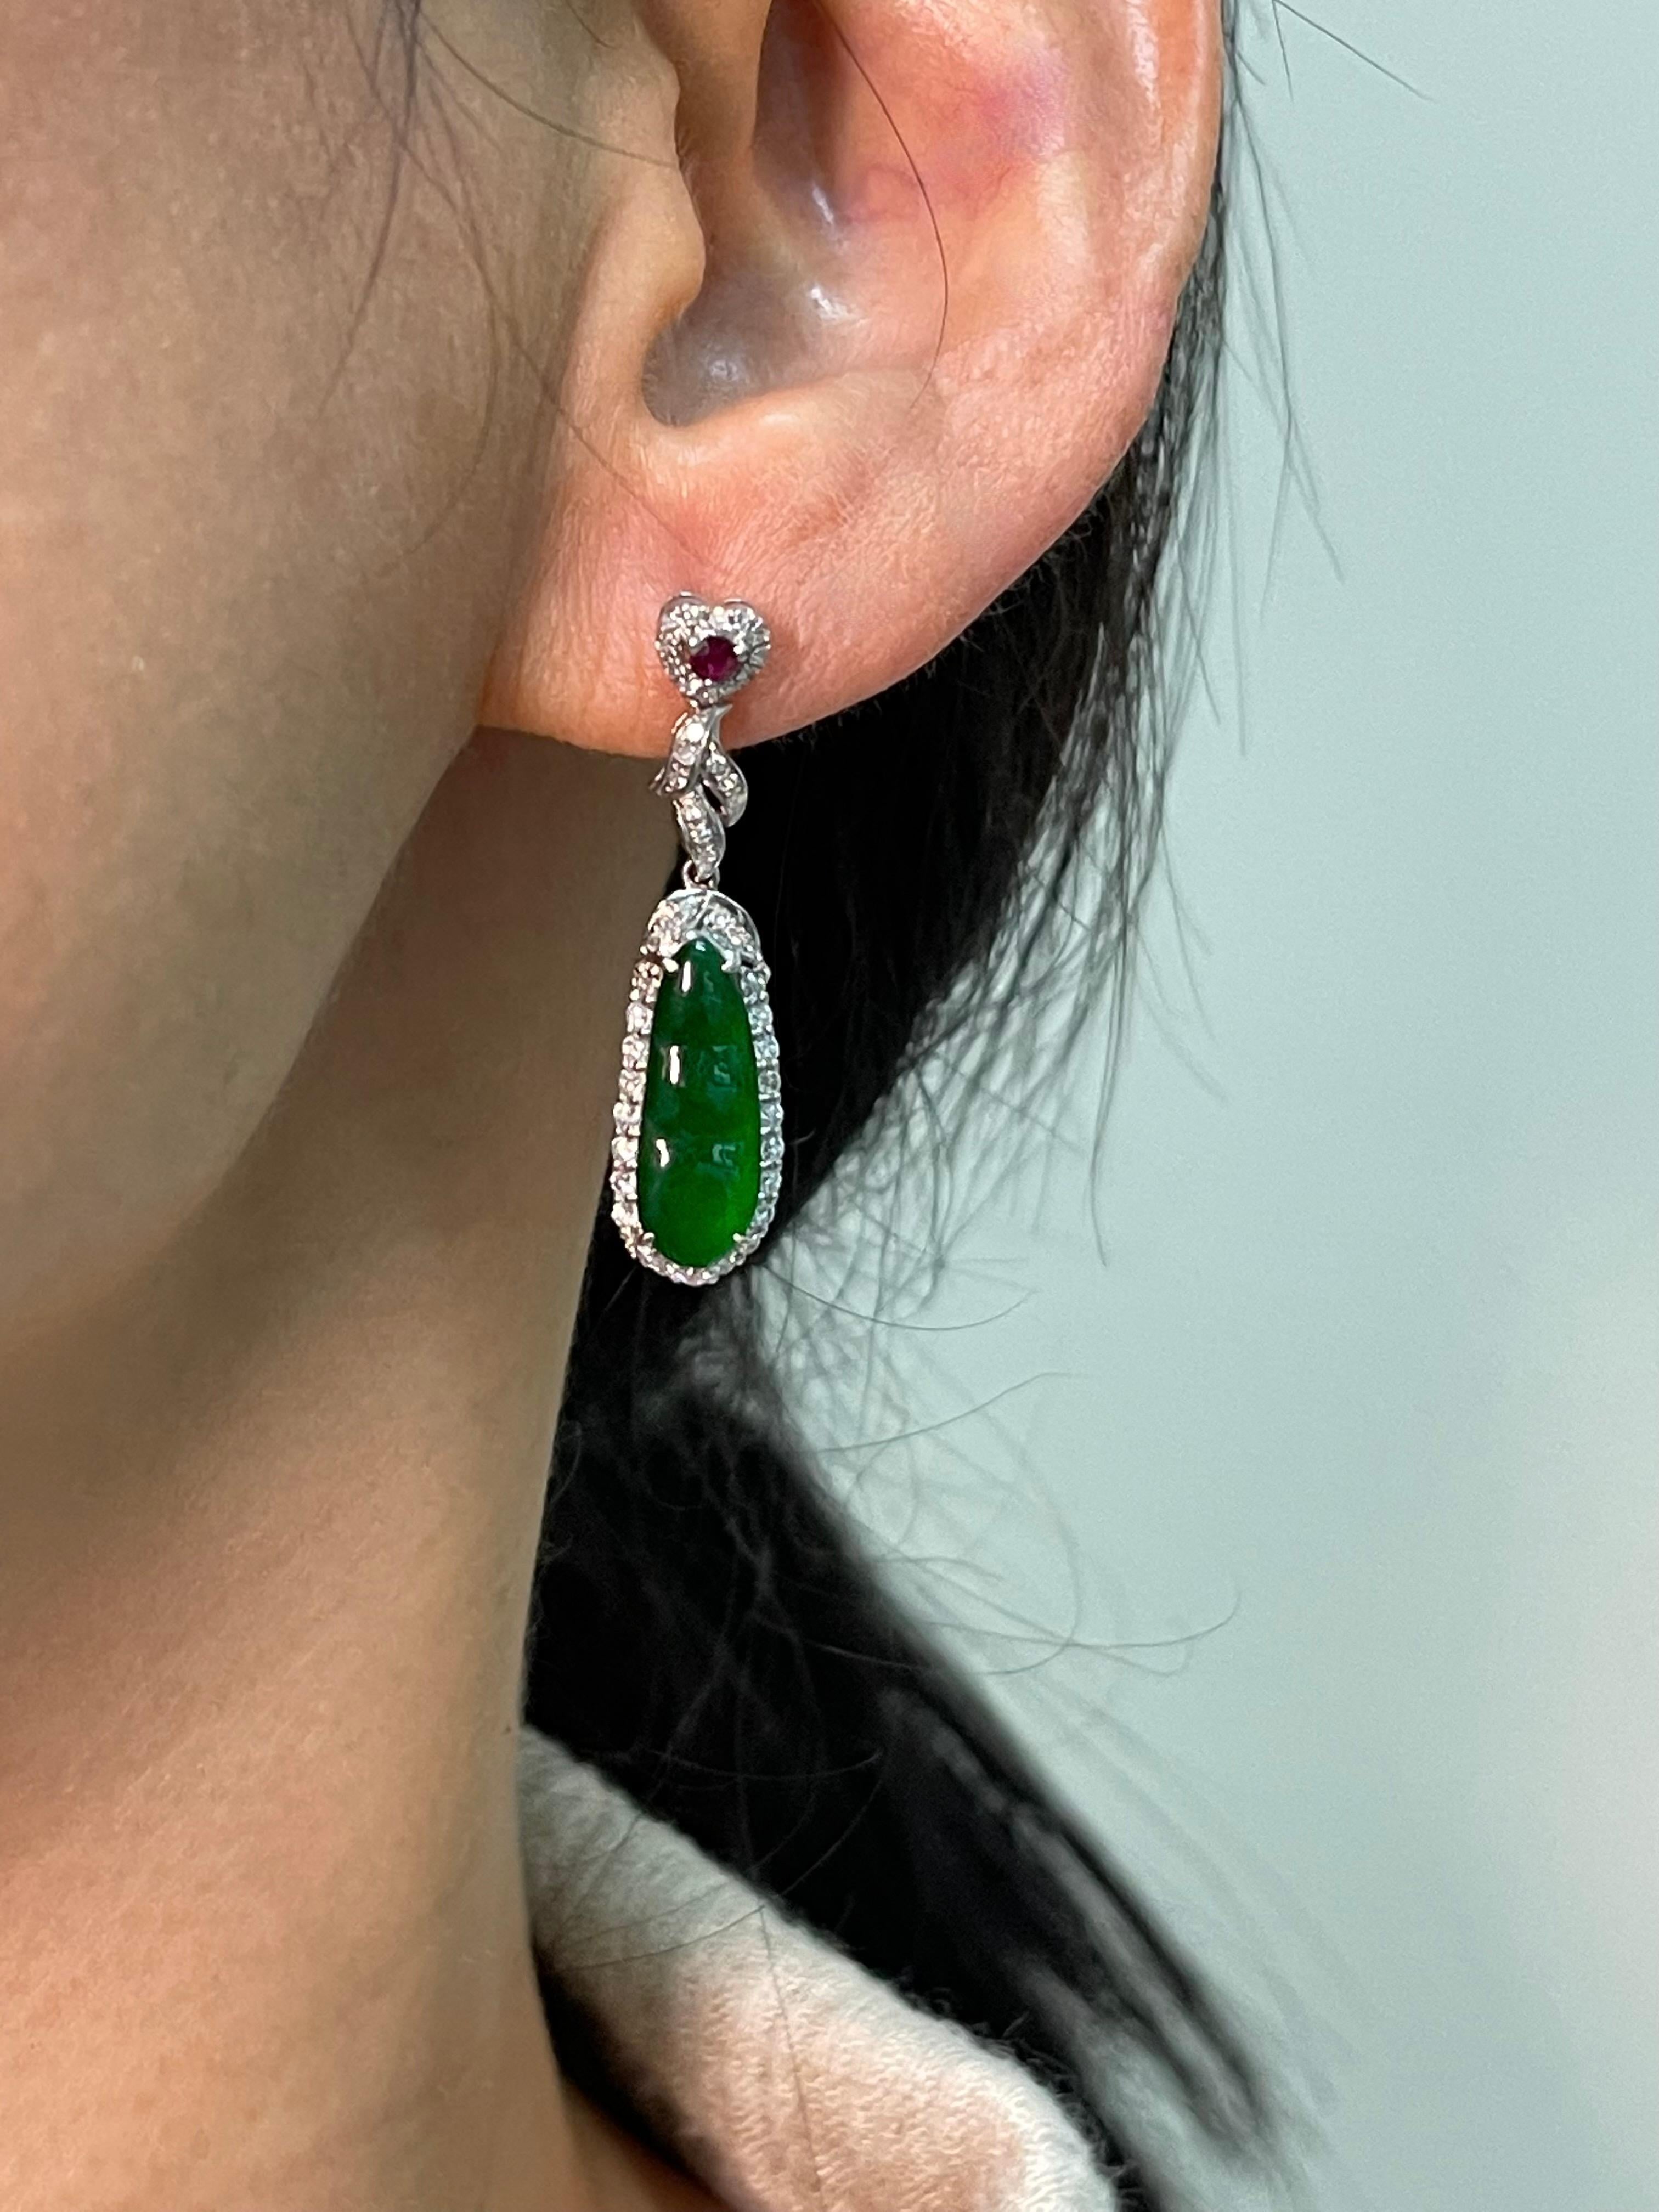 Please check out the HD video! These icy imperial green jade earrings are certified by 2 labs. The earrings are set in 18k white gold, rubies and white diamonds. The 2 jade peapods glows. The imperial  jade peapod carving represents safety all year